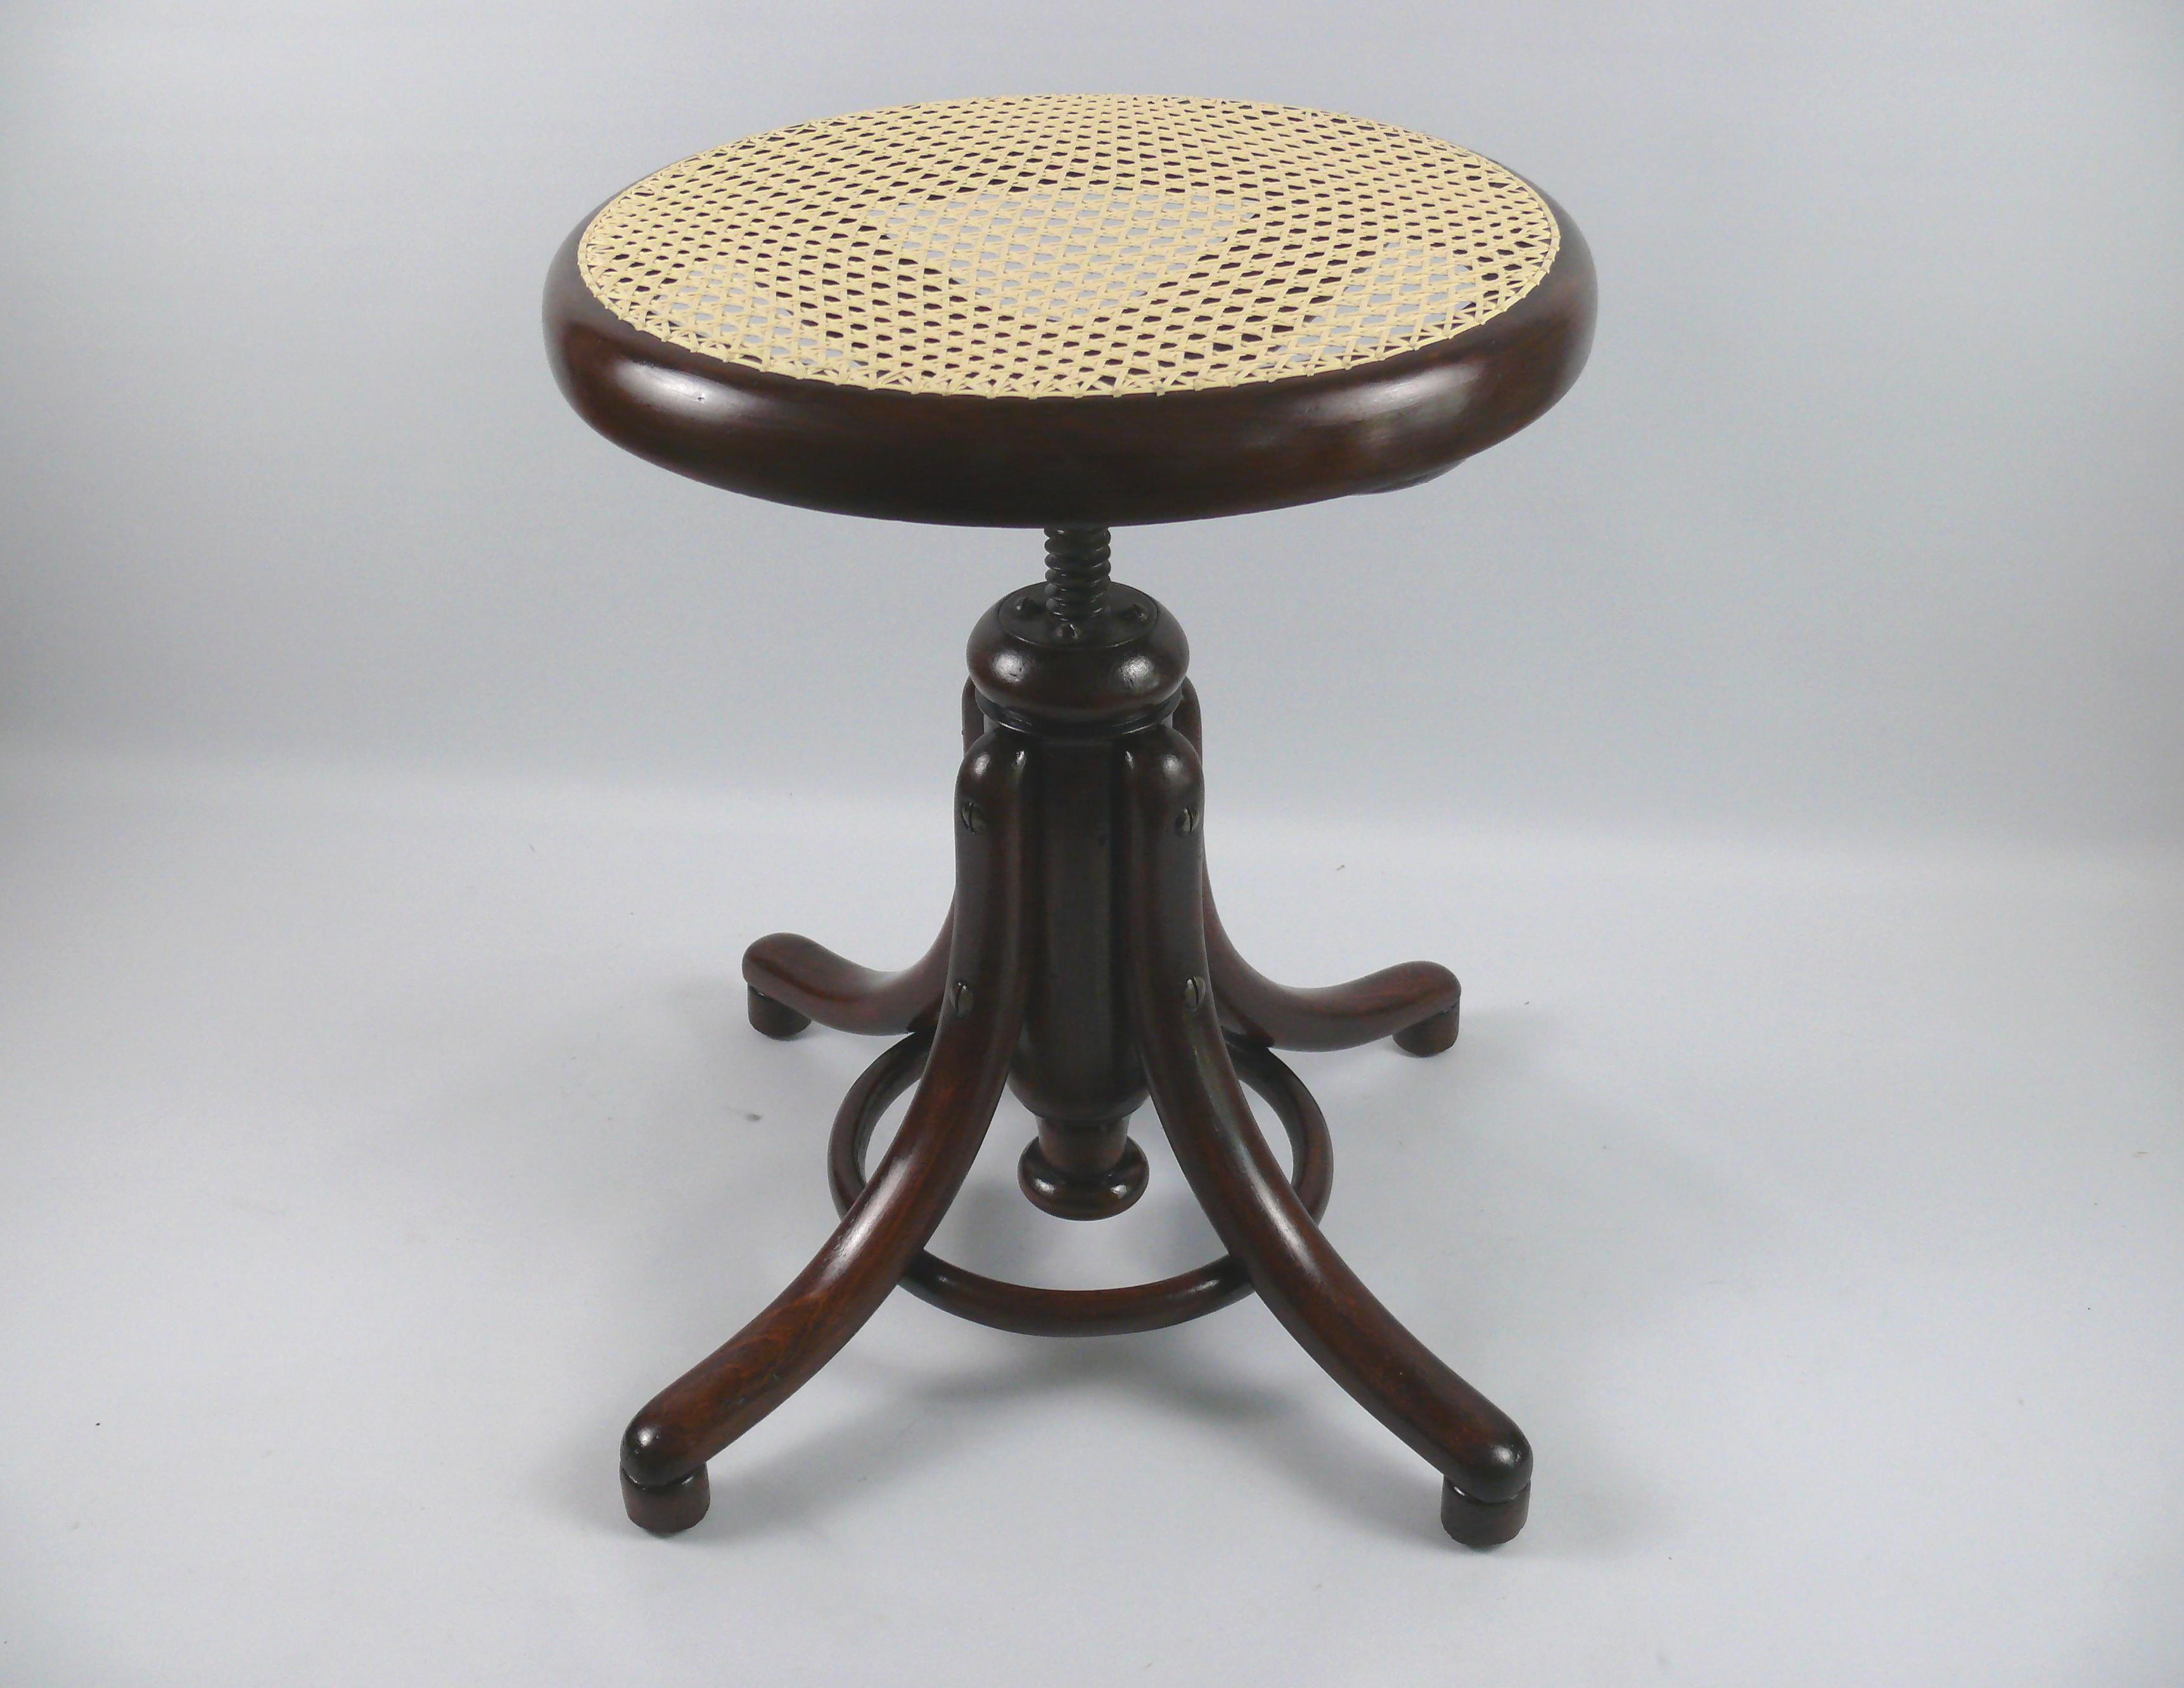 Restored swivel stool no. 1 from the traditional company Gebrüder Thonet, Vienna from the end of the 19th century. The piano stool has a frame of four steam-bent feet. The curved feet are held together by the wooden ring made of curved wood. The